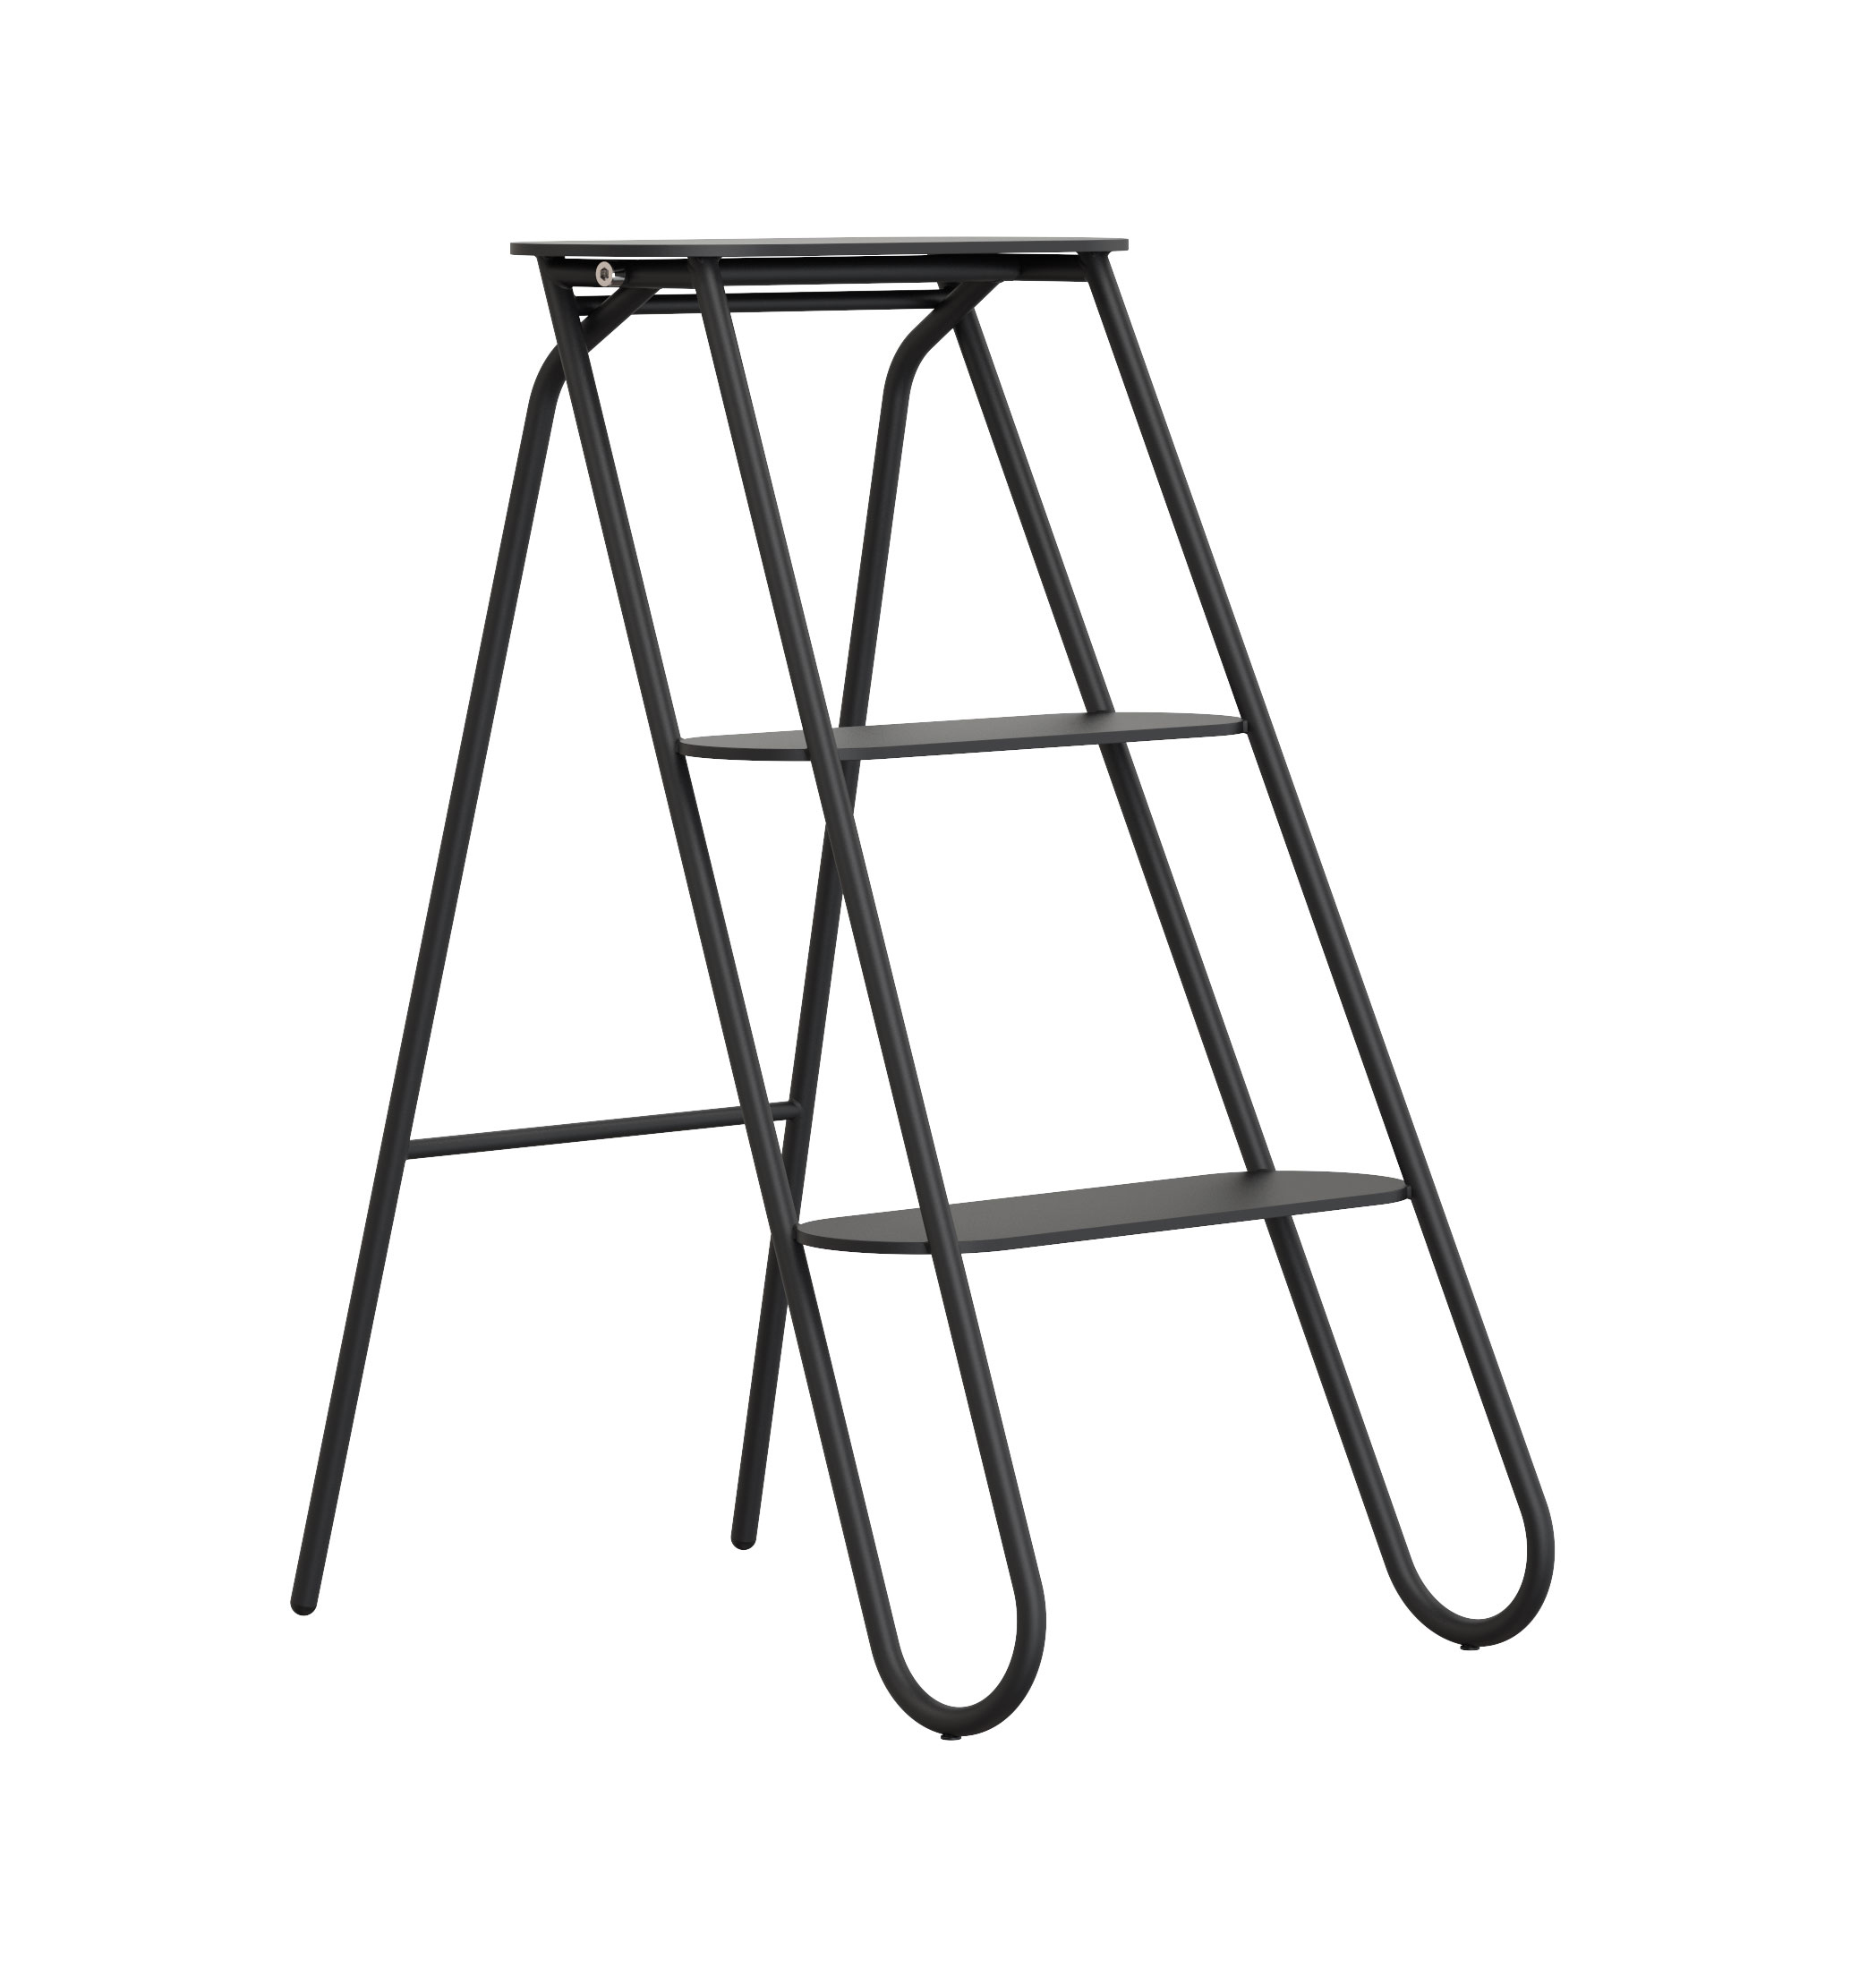 The Frost Step Ladder